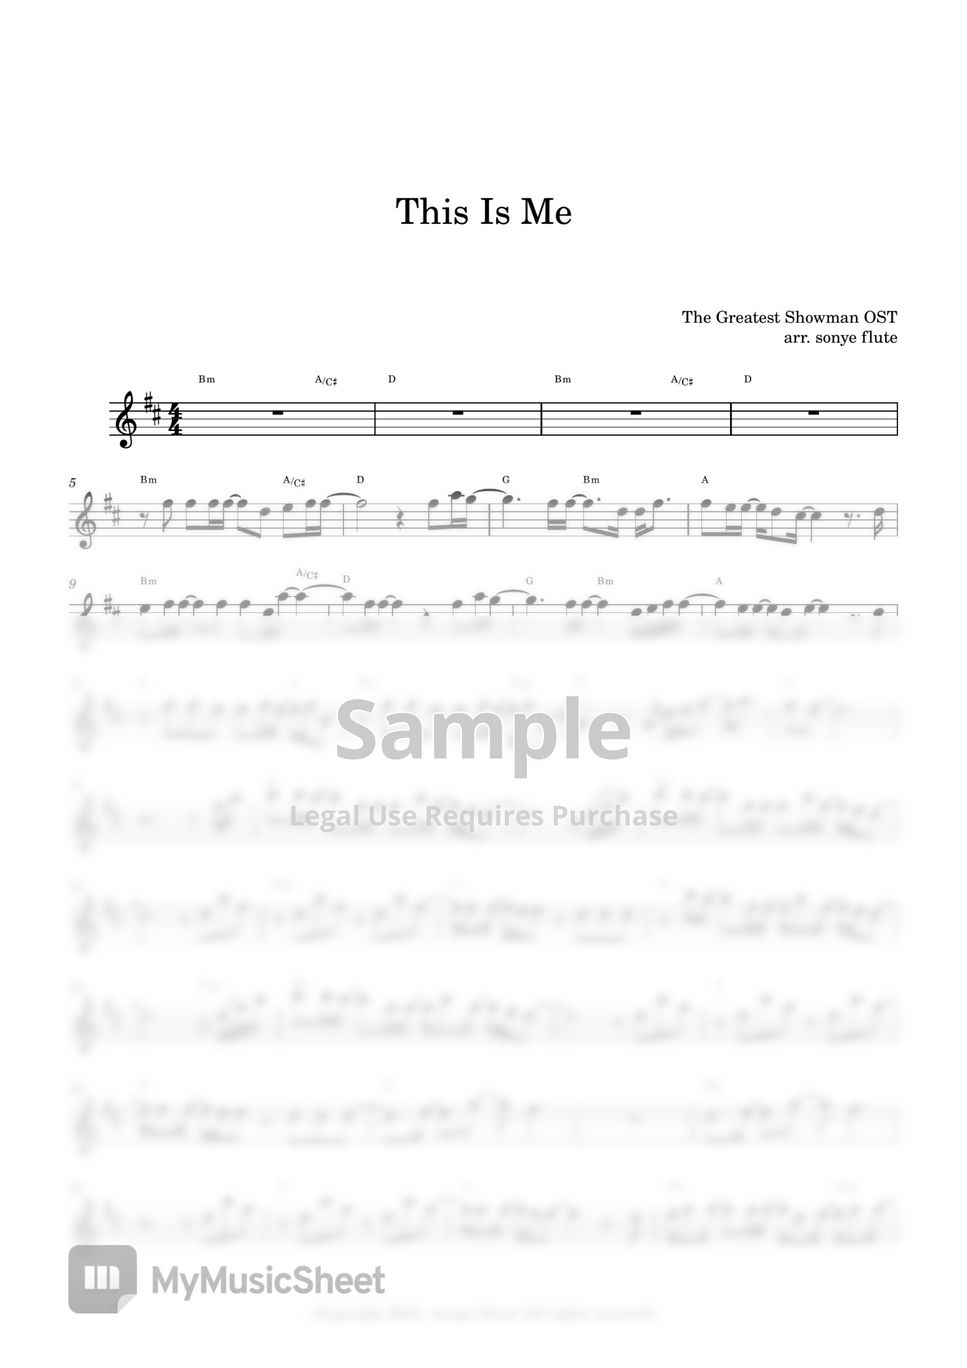 The Greatest Showman OST 위대한 쇼맨 - This Is Me (Flute Sheet Music) by sonye flute